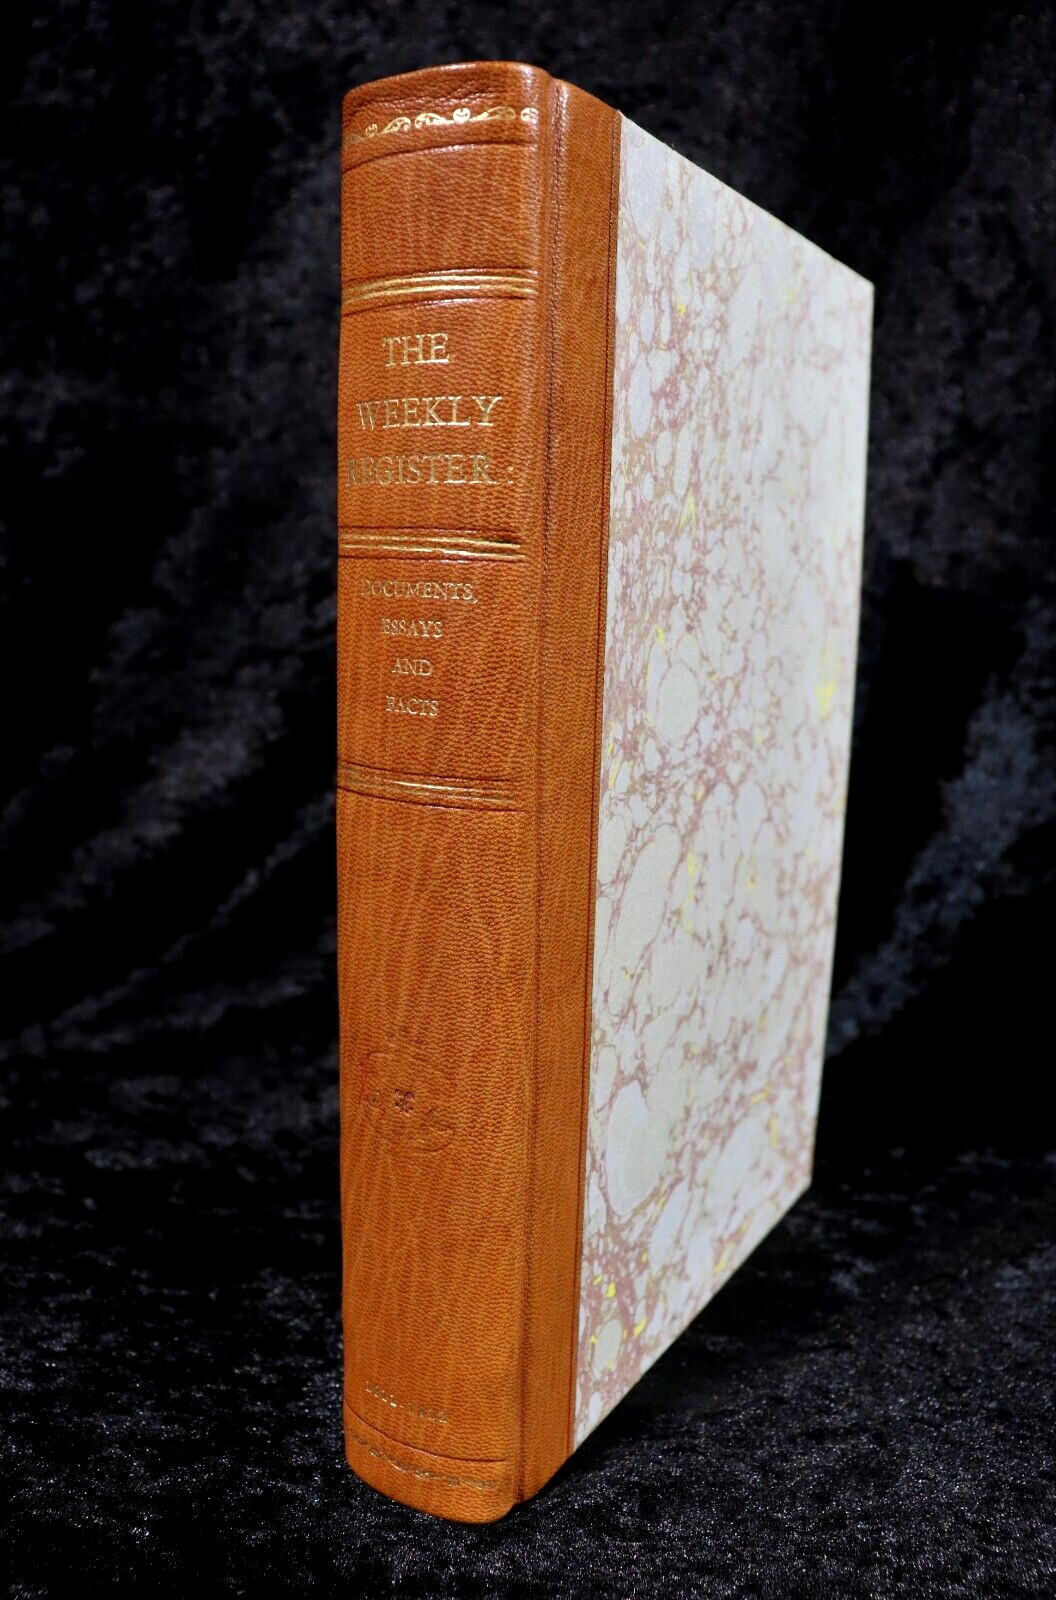 The Weekly Register Volume 1: 1811 to 1812 - Antiquarian History Book